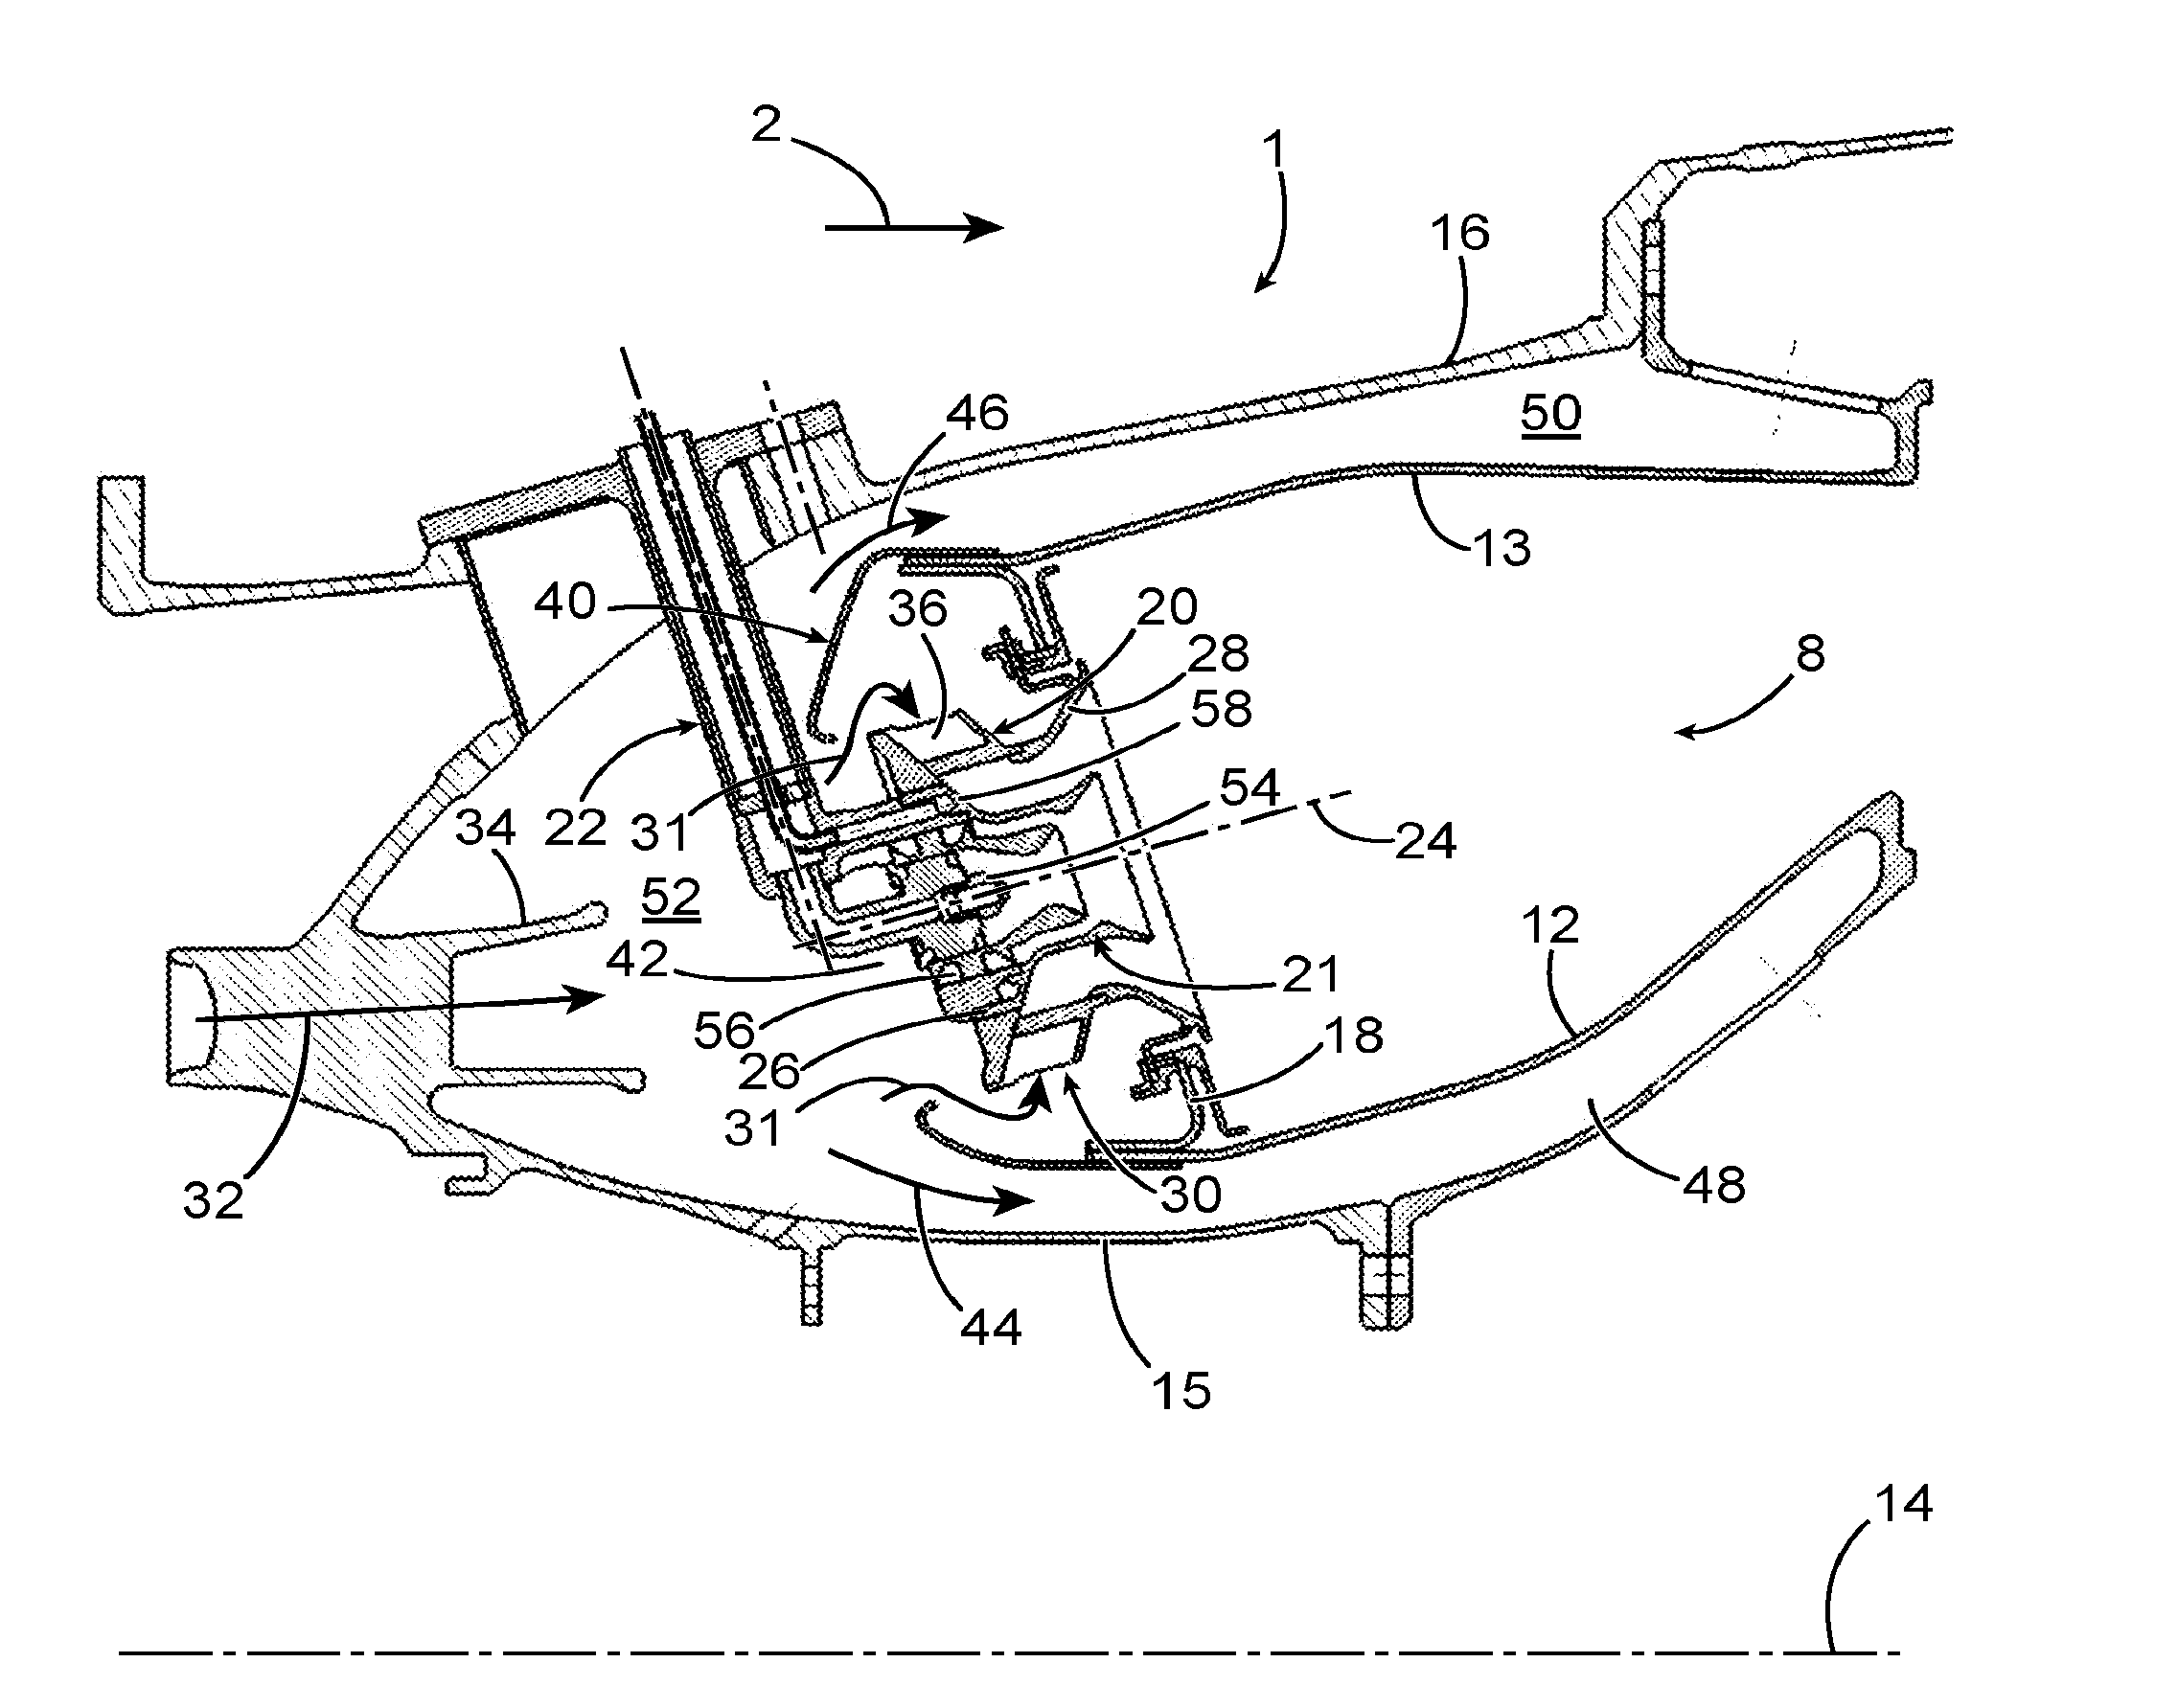 Combustion chamber for a turbine engine with homogeneous air intake through fuel injection system